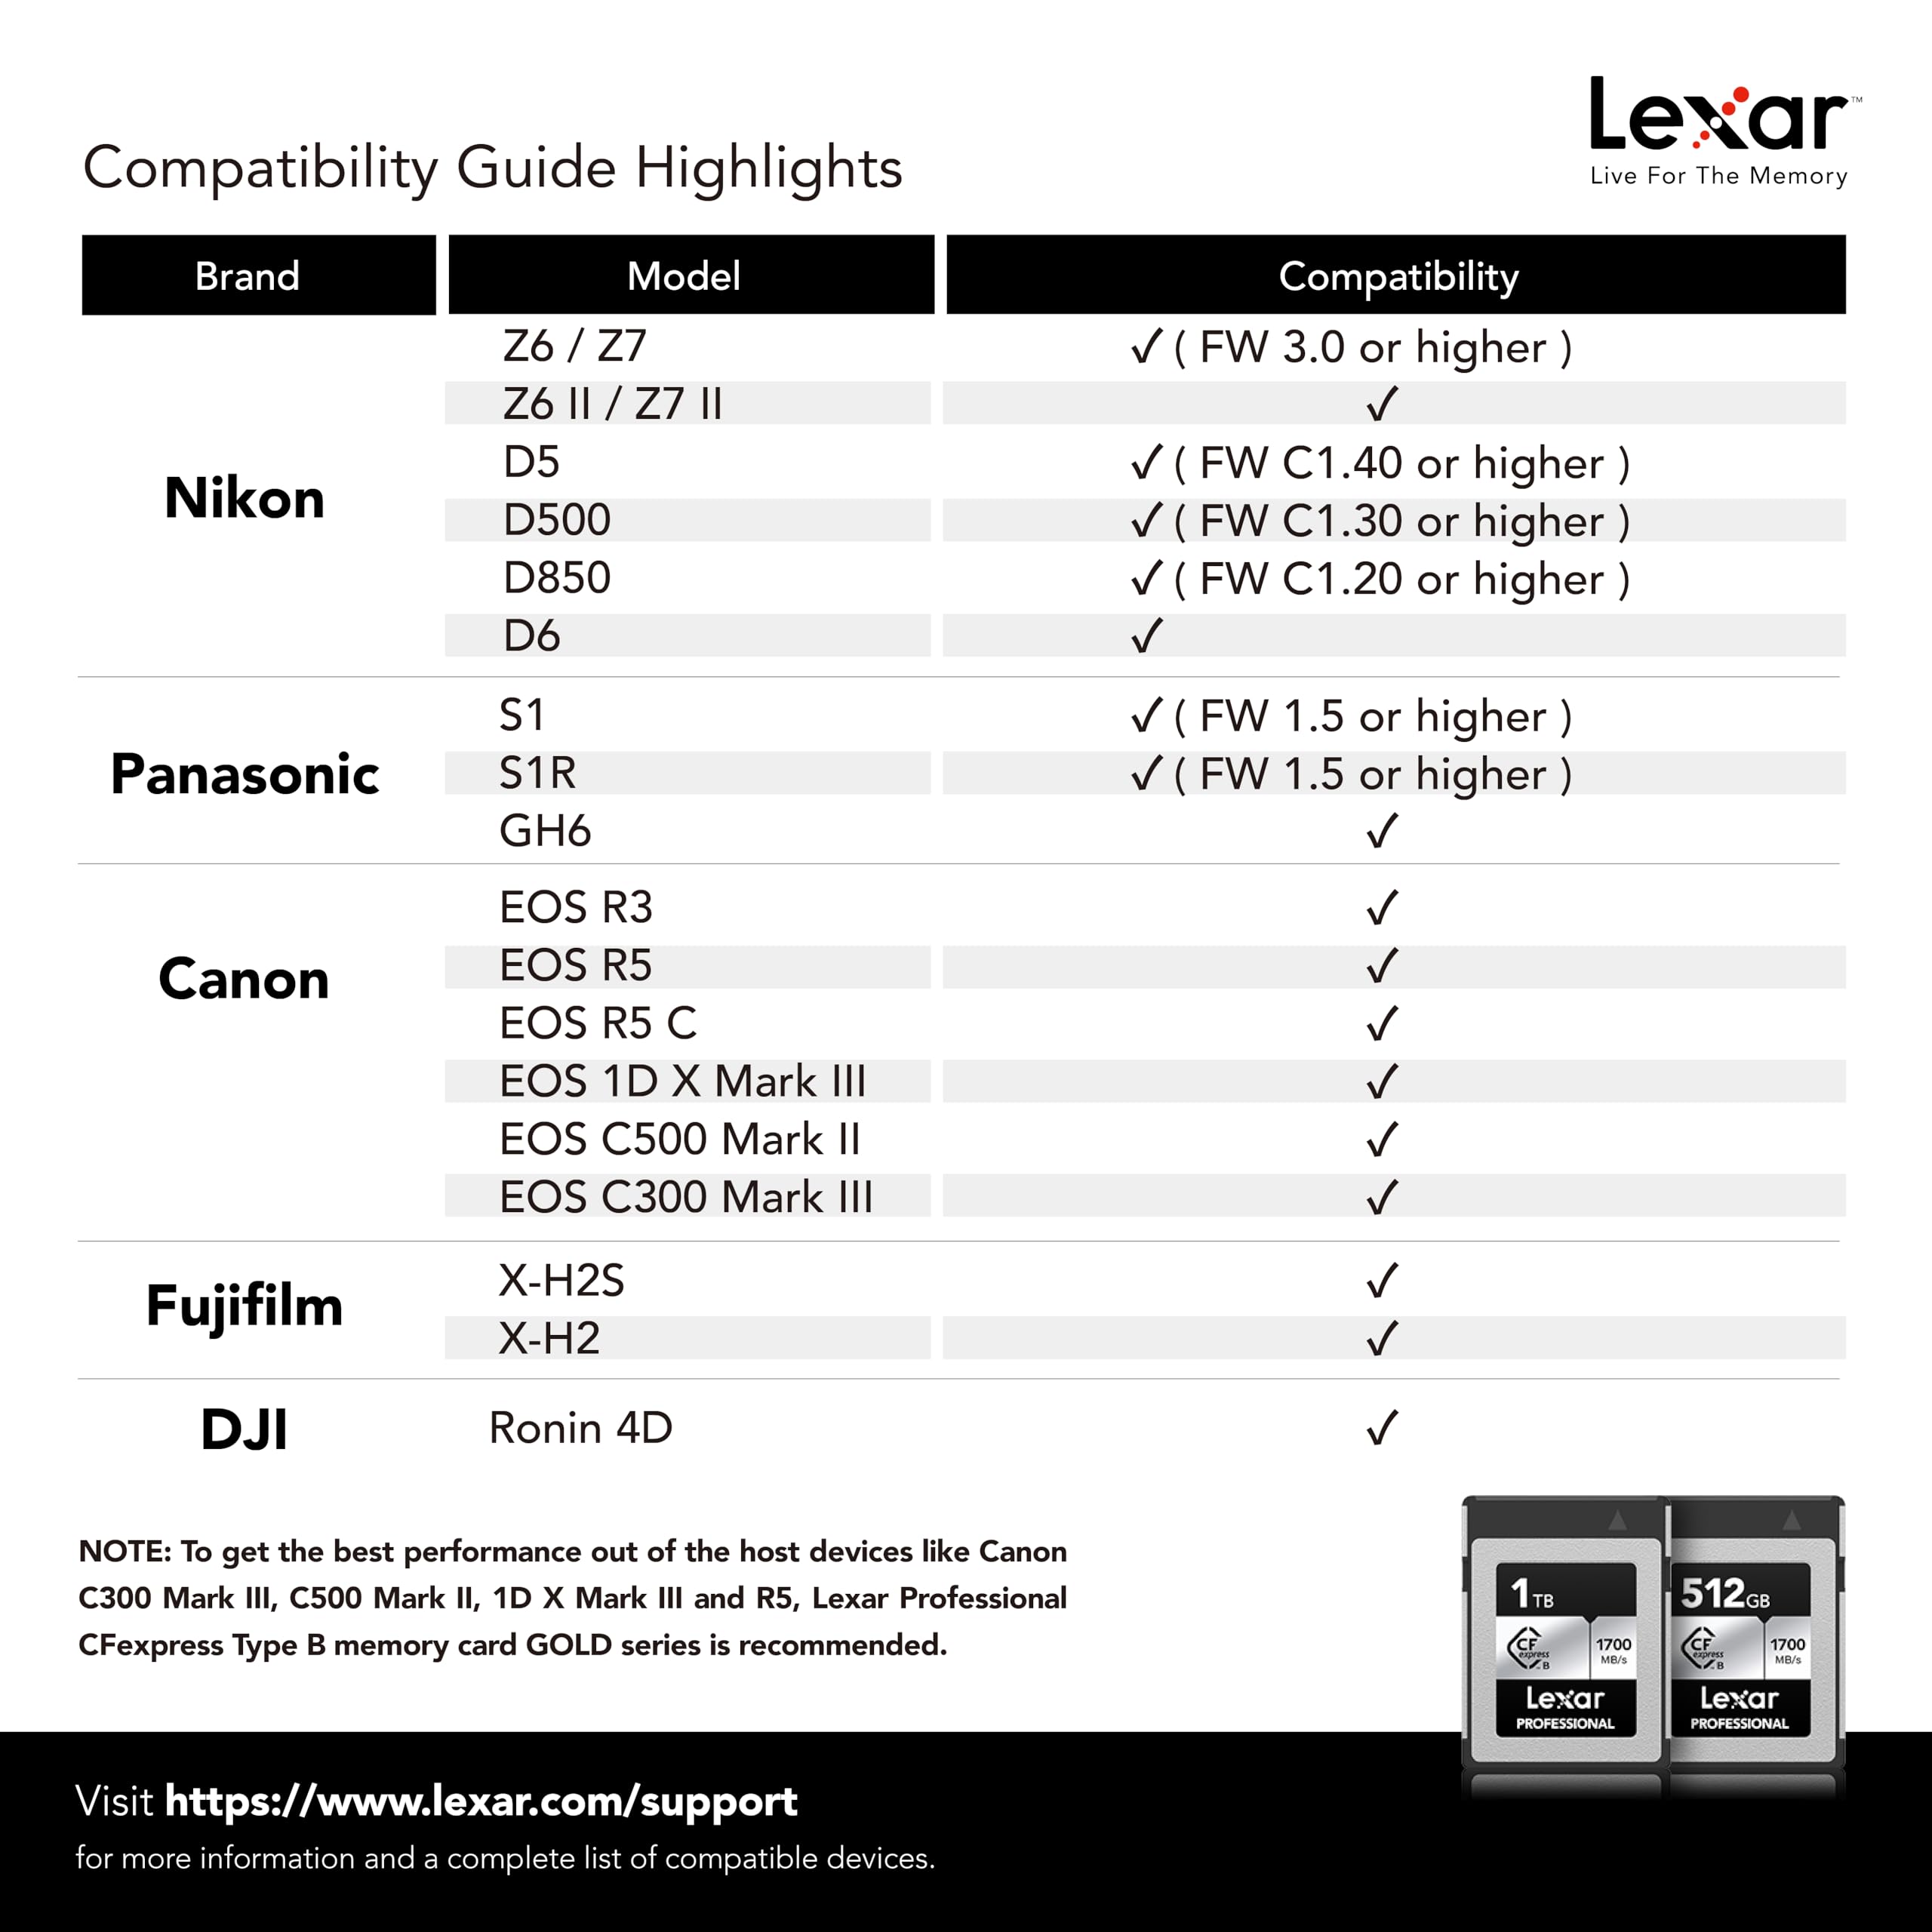 Lexar 512GB Professional Silver SE CFexpress Type B Memory Card, for Photographers, Videographers, Up to 1700/1250 MB/s, 8K Video (LCXEXSE512G-RNENU)